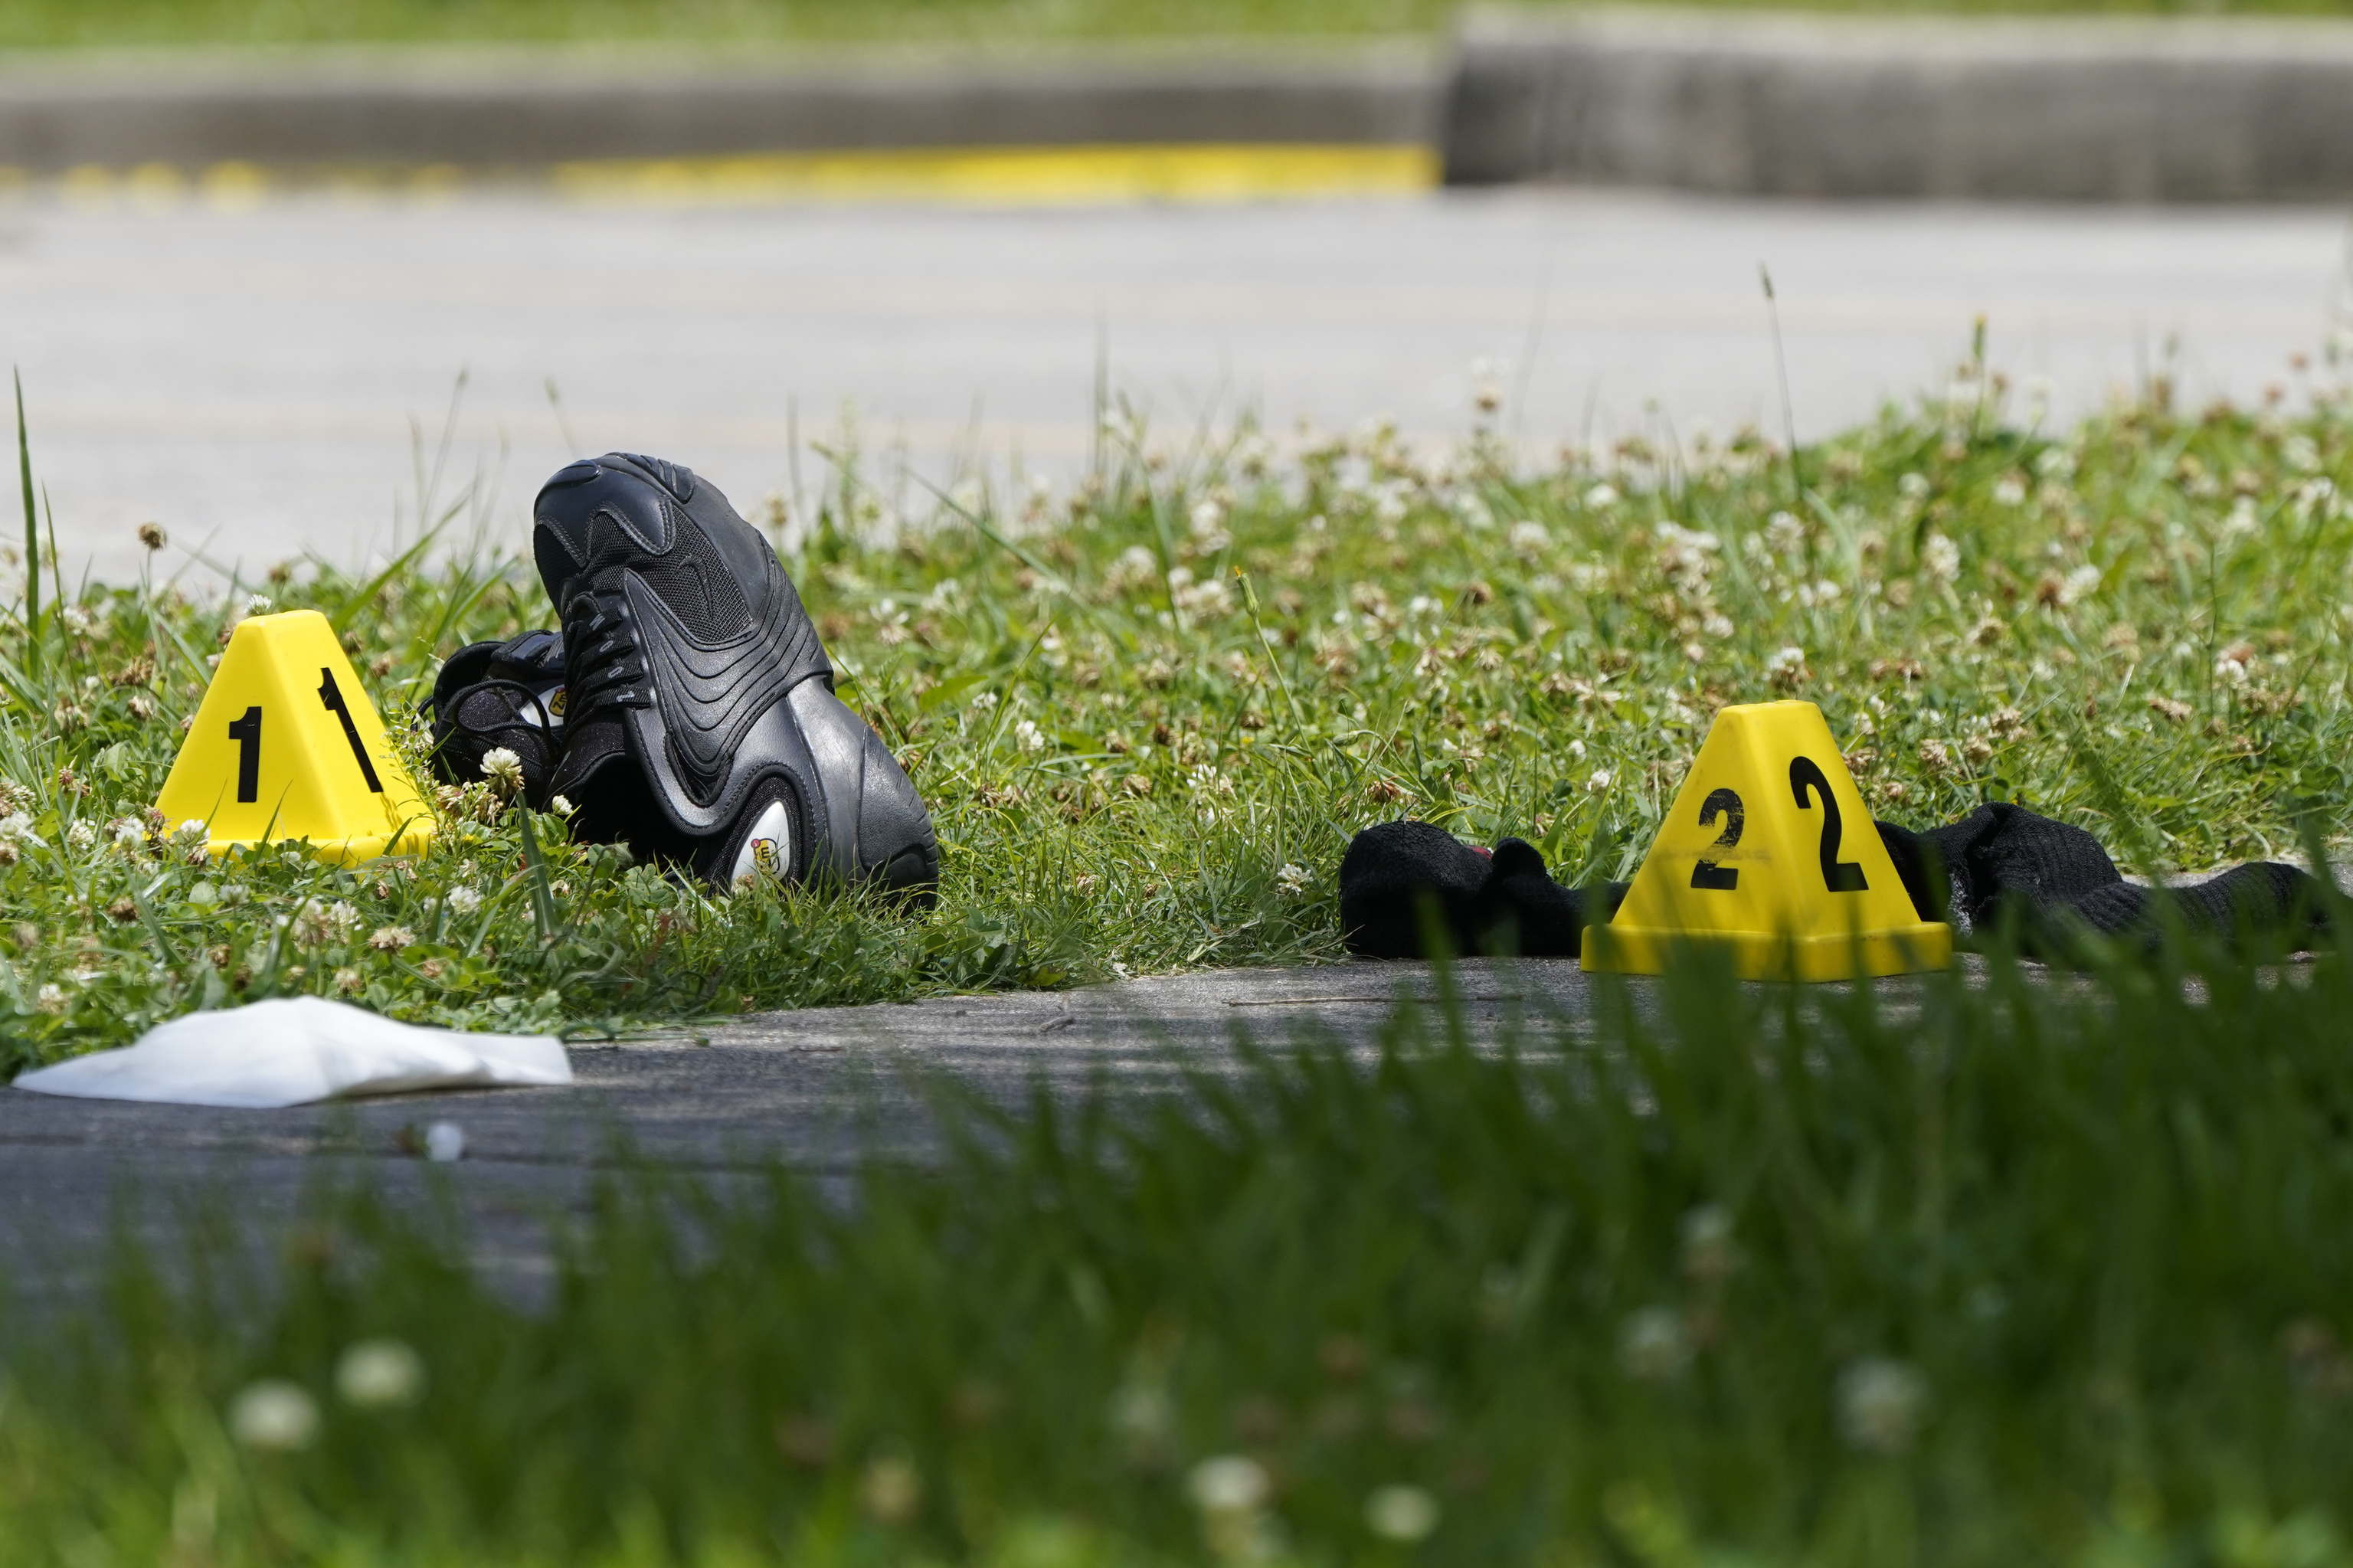 Shoes and clothing with proof marks at the shooting site.